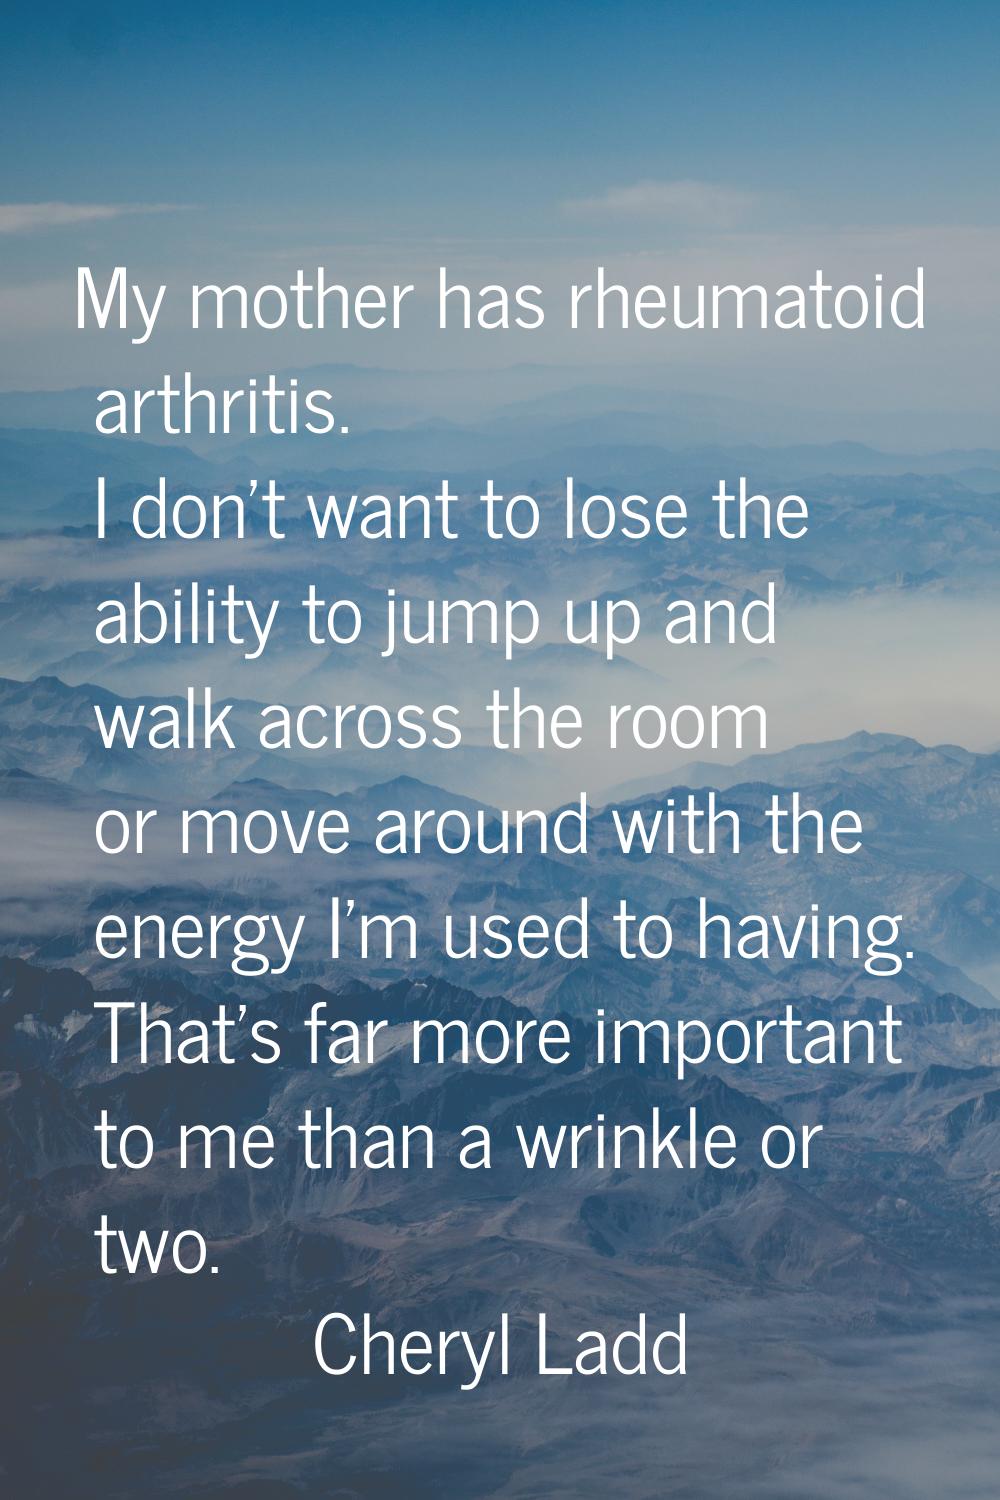 My mother has rheumatoid arthritis. I don't want to lose the ability to jump up and walk across the